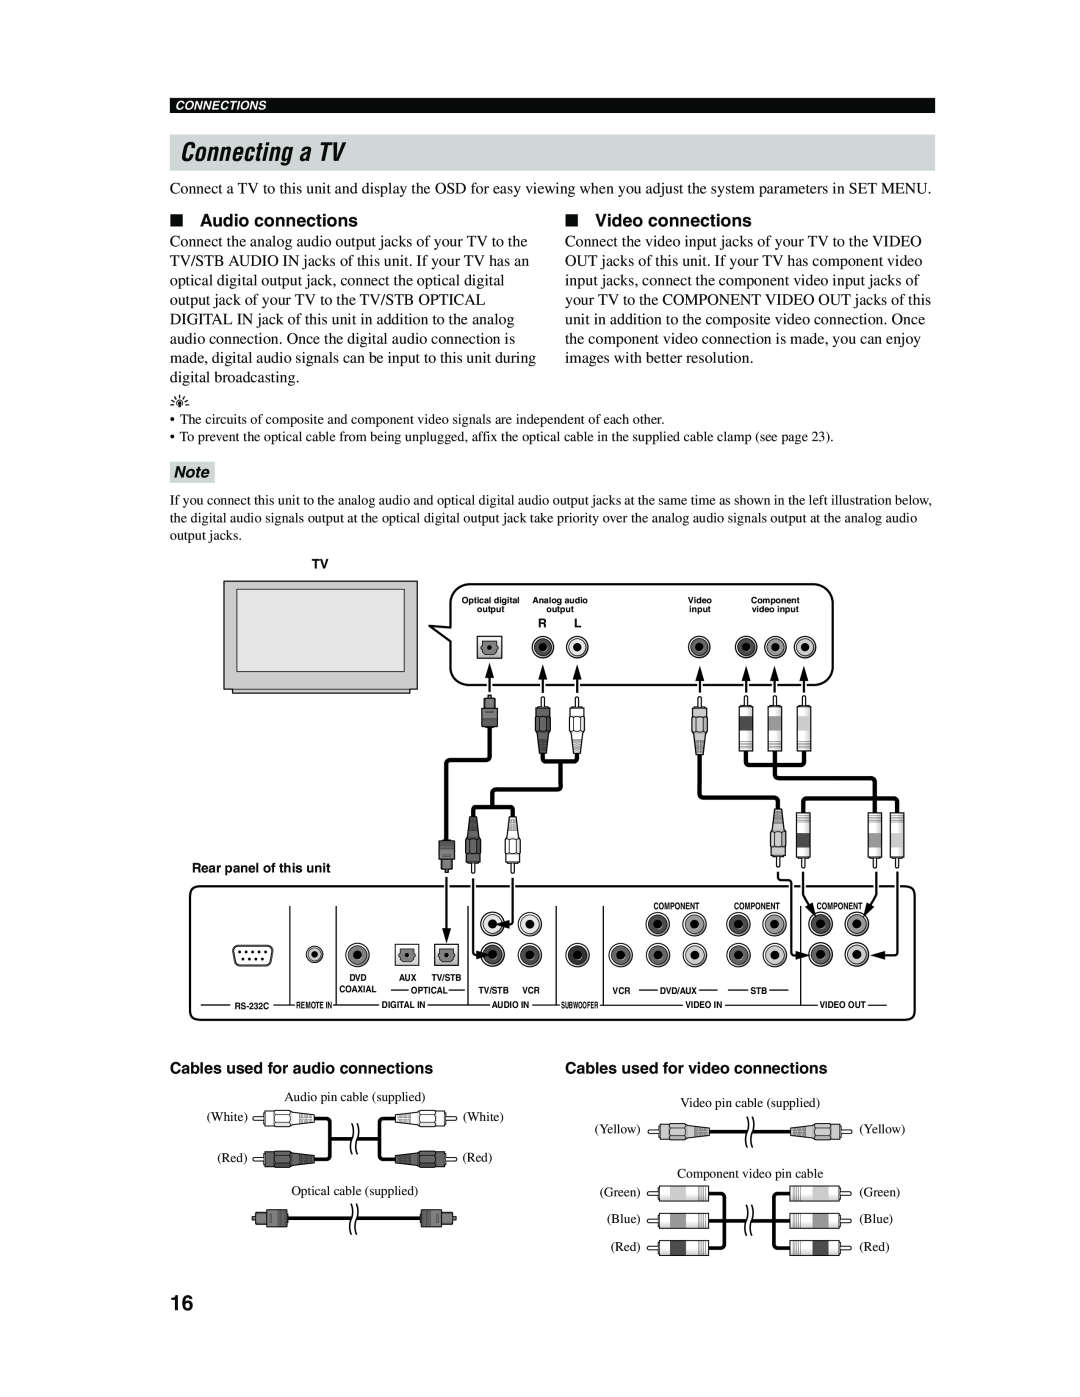 Yamaha YSP-1000 owner manual Connecting a TV, Audio connections, Video connections 